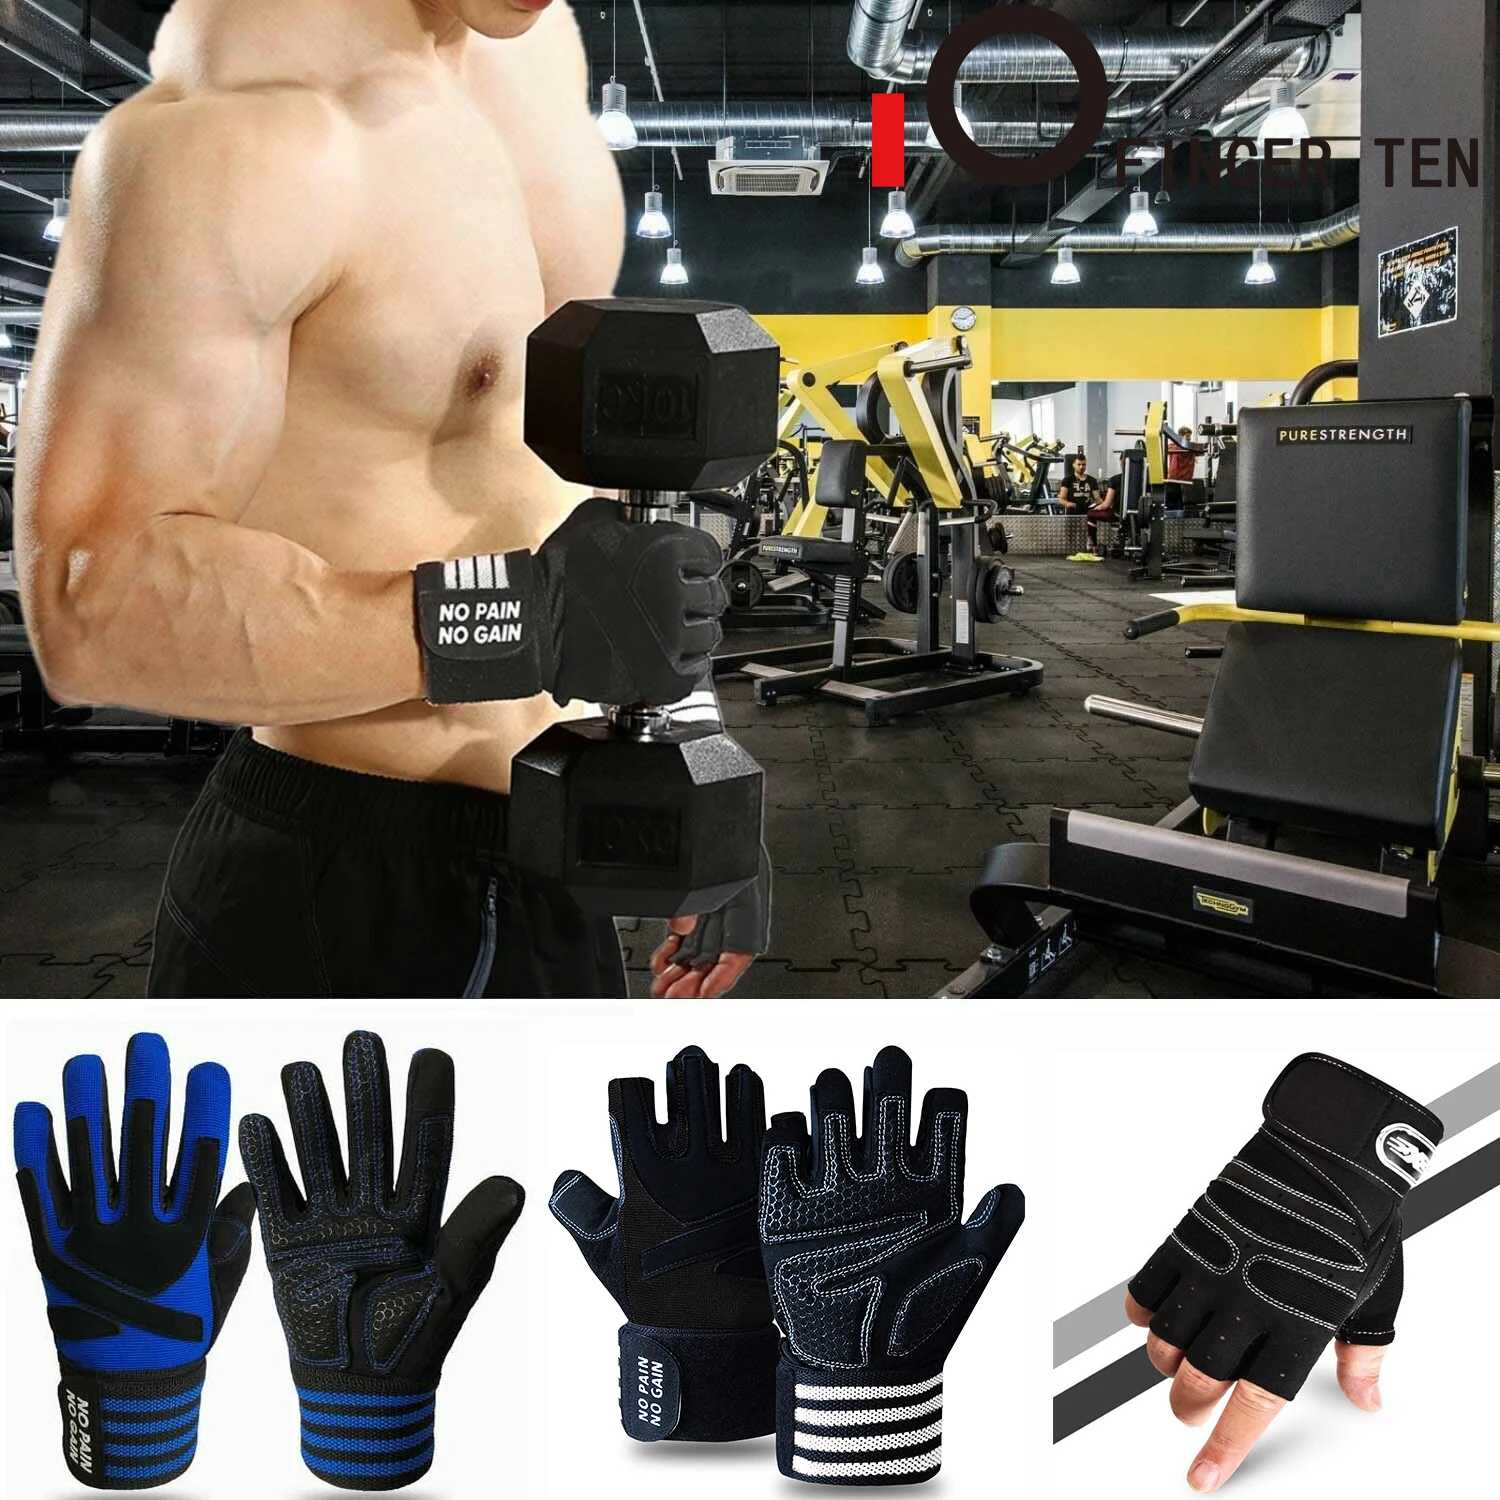 Gym Body Building Training Fitness Gloves Sport Weight Lifting Workout Pip XL 